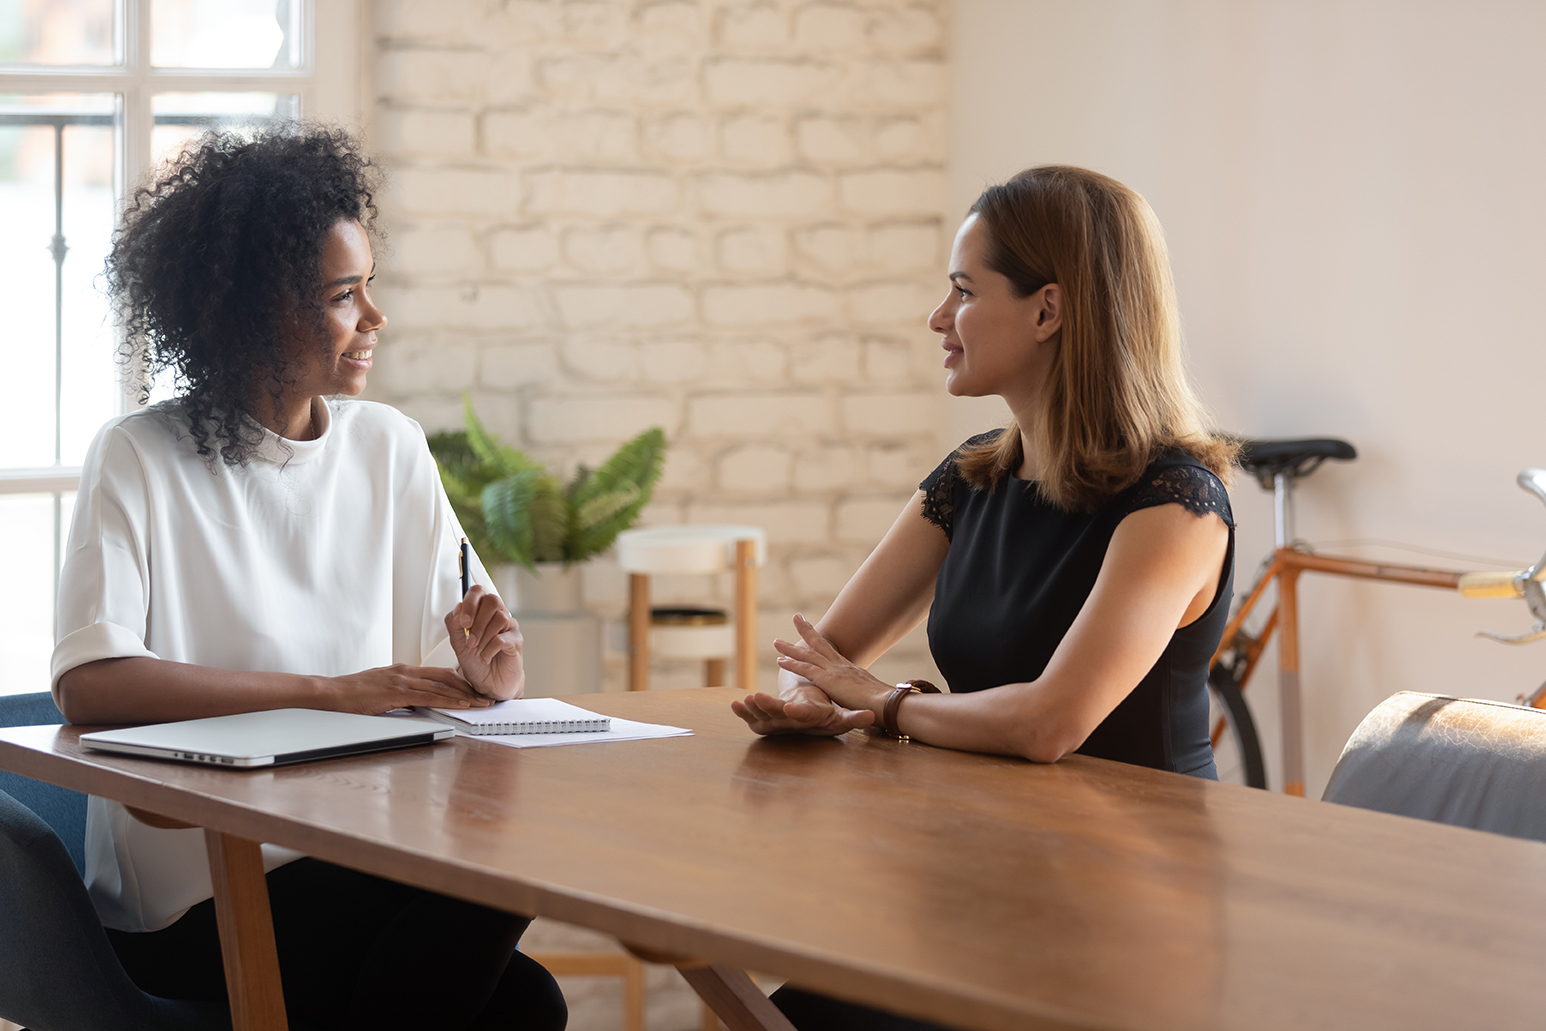 How to Prepare For A “Tell Me About Yourself” Interview Question